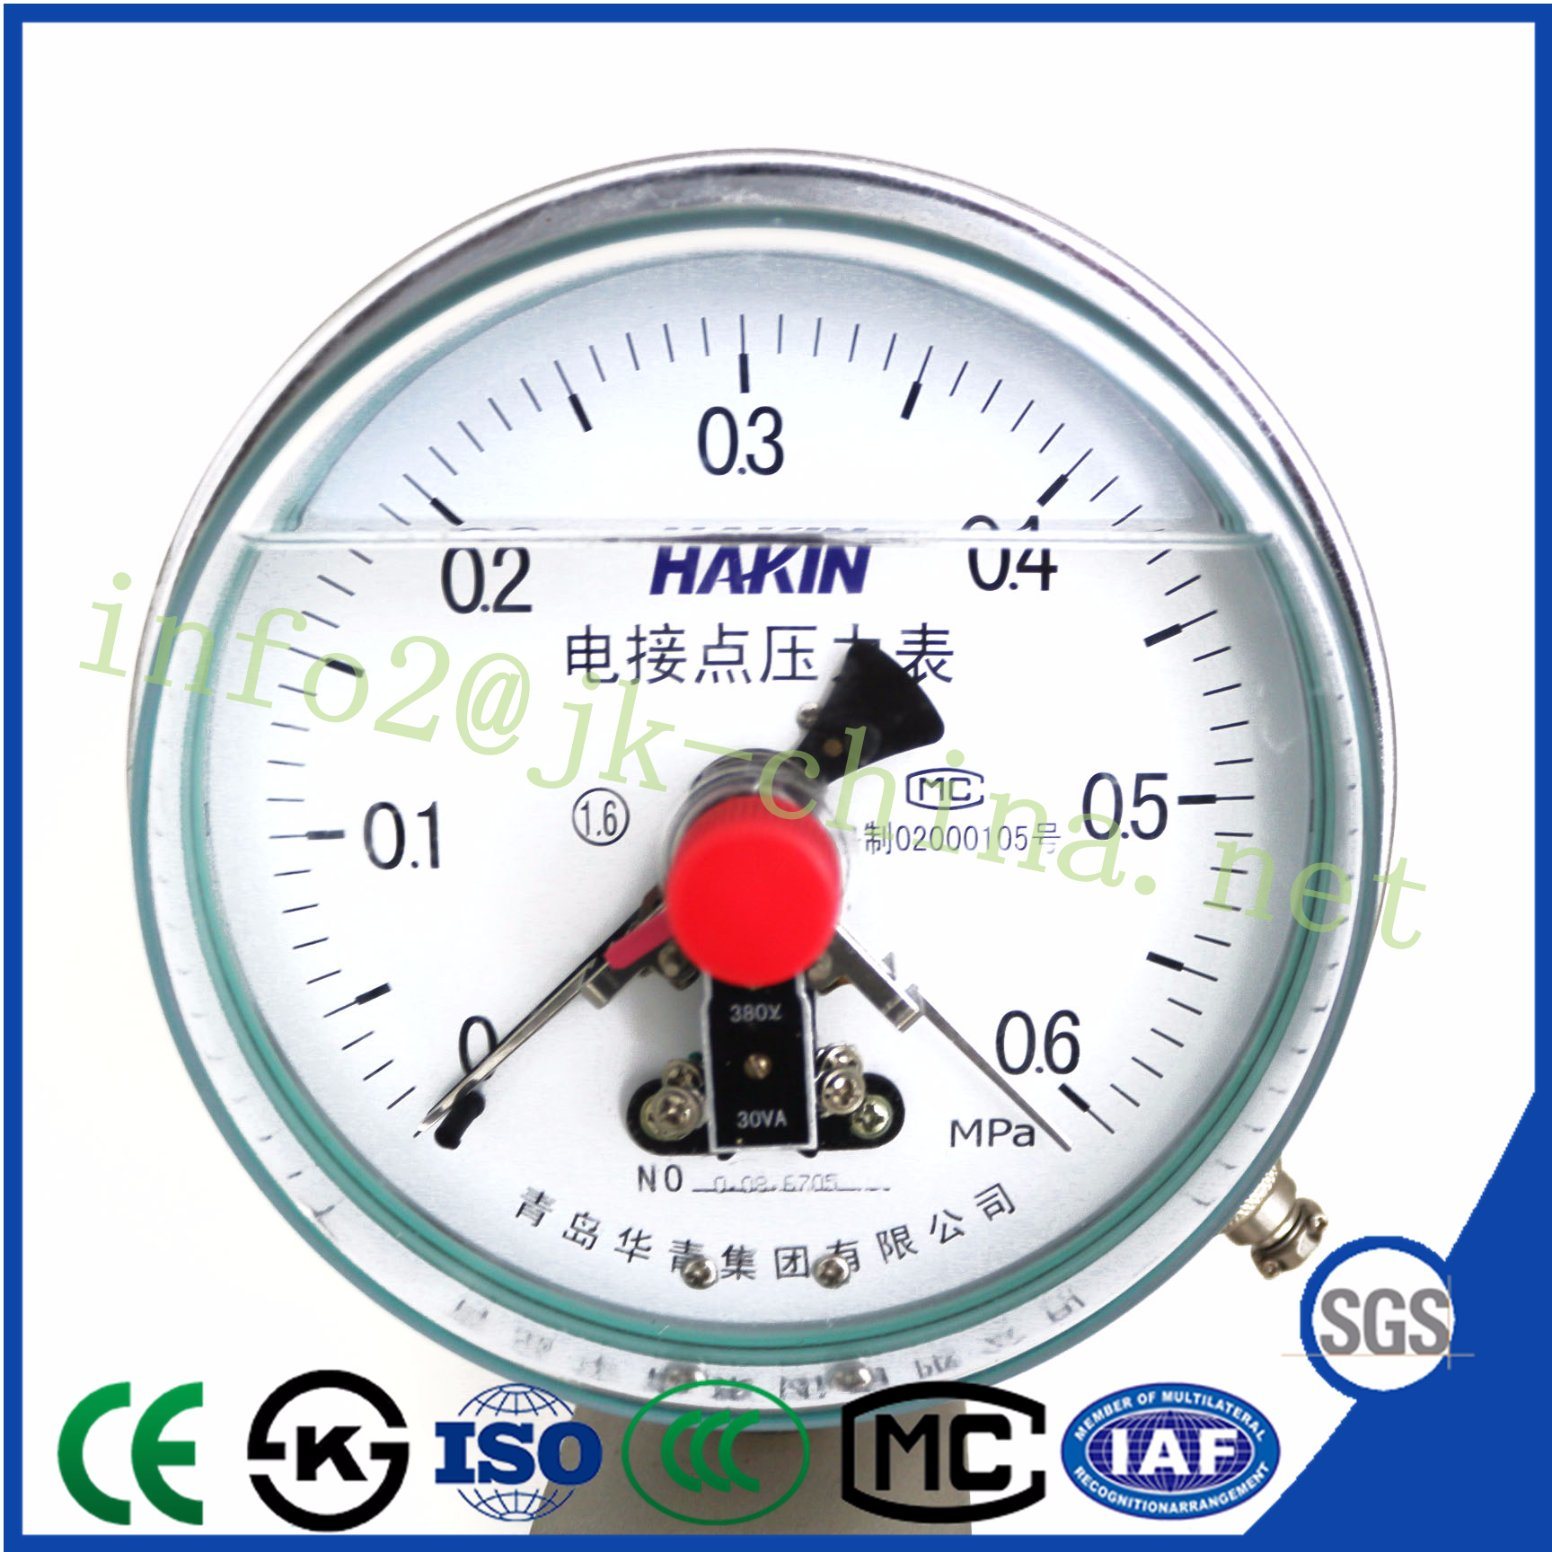 High Quality Shock - Resistant Electric Contact Pressure Gauge